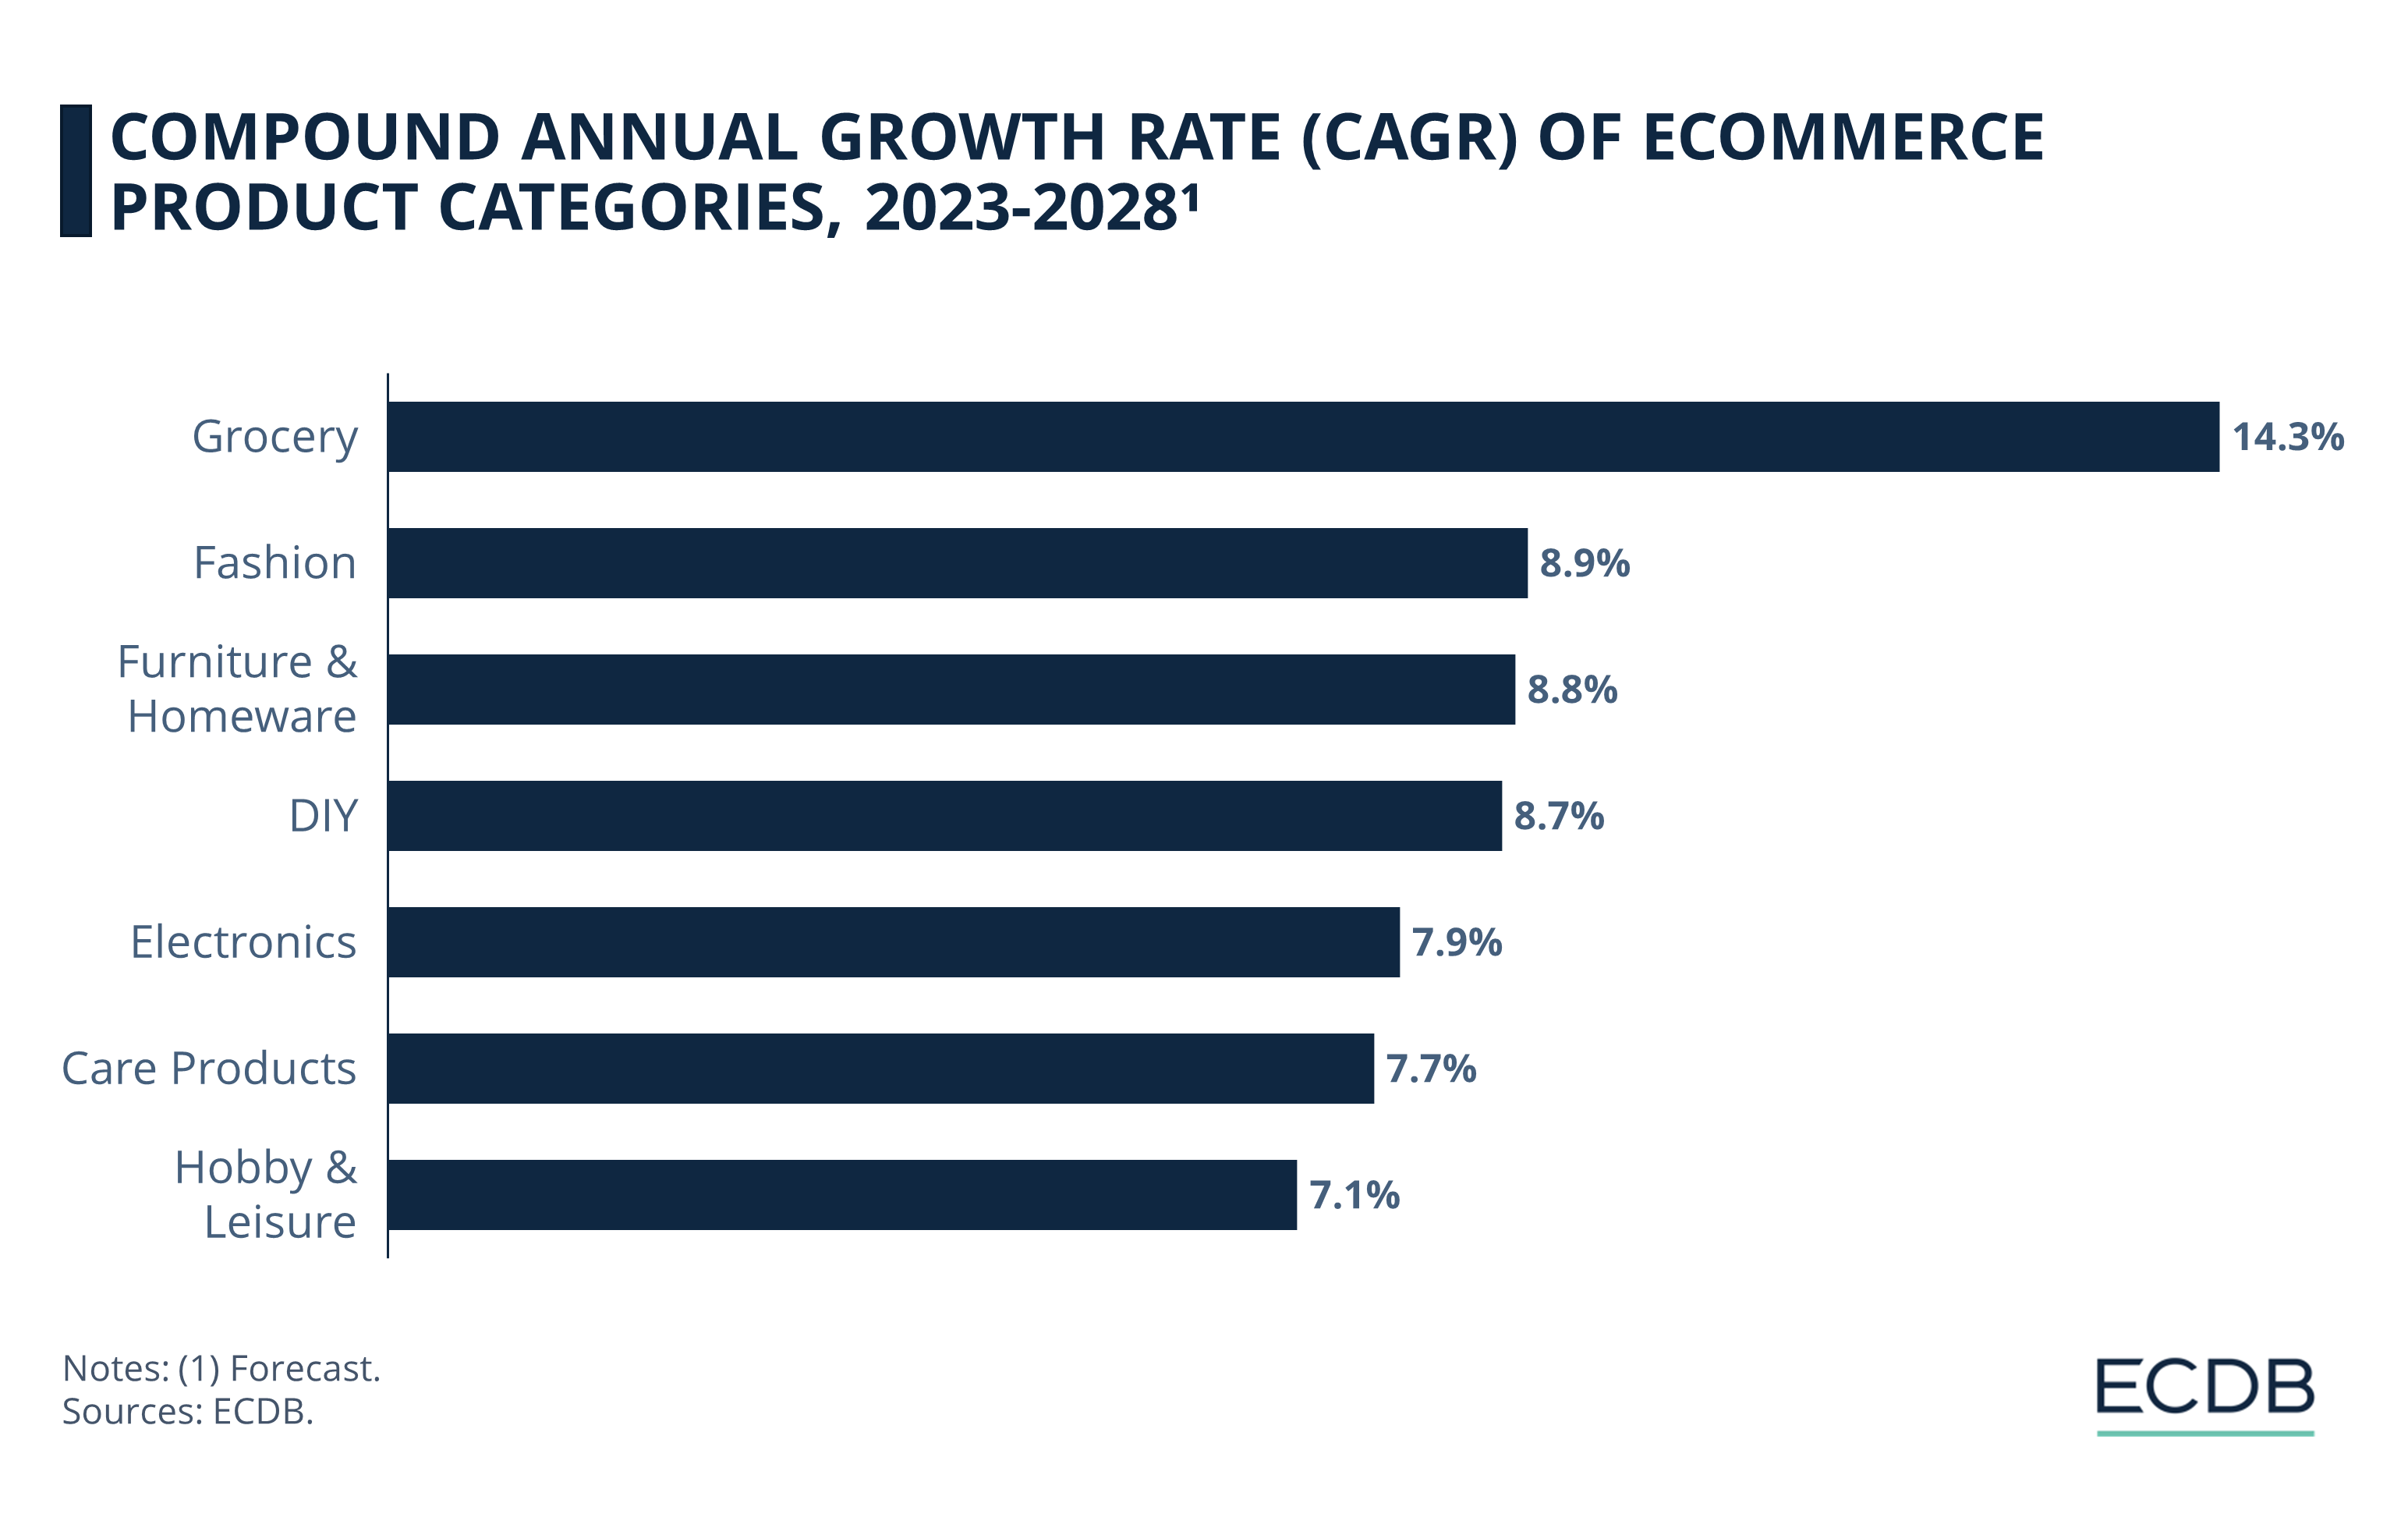 Compound Annual Growth Rate (CAGR) of eCommerce Product Categories, 2023-2028